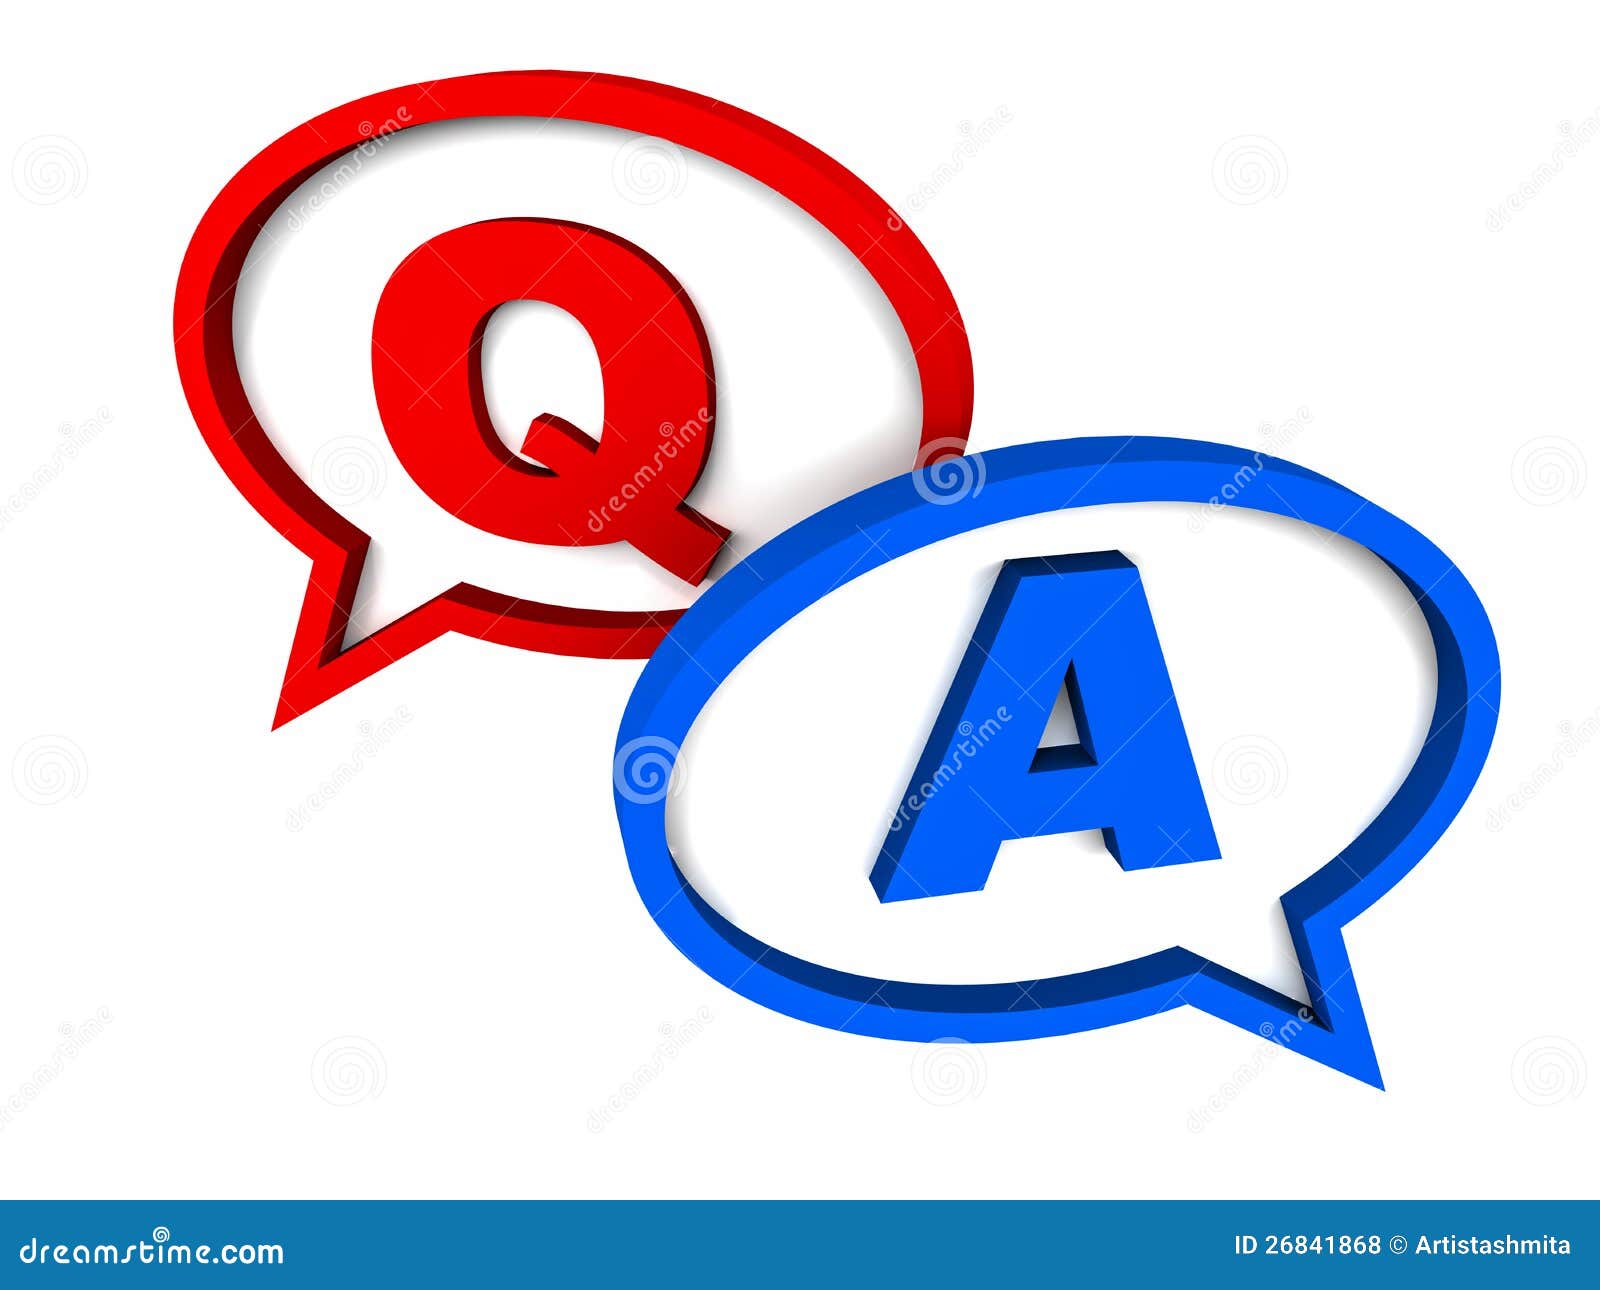 clipart for questions and answers - photo #39